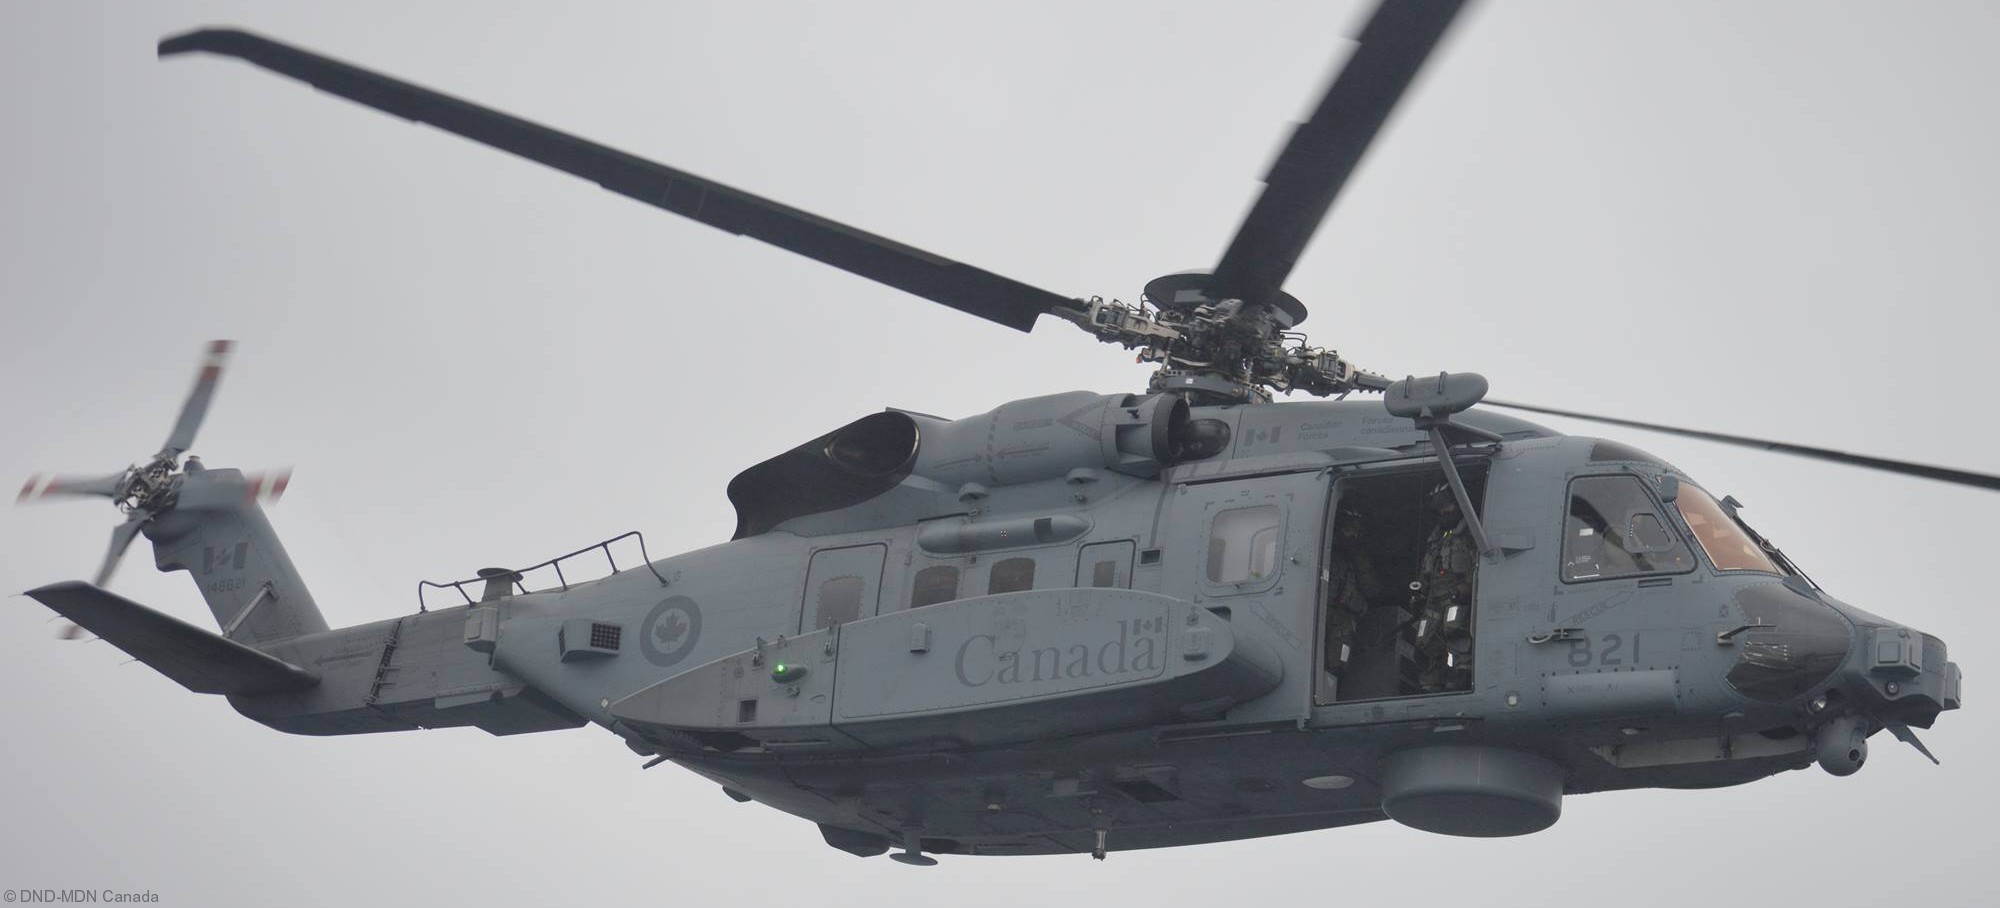 ch-148 cyclone naval helicopter royal canadian air force navy rcaf sikorsky hmcs 406 423 443 maritime squadron 35